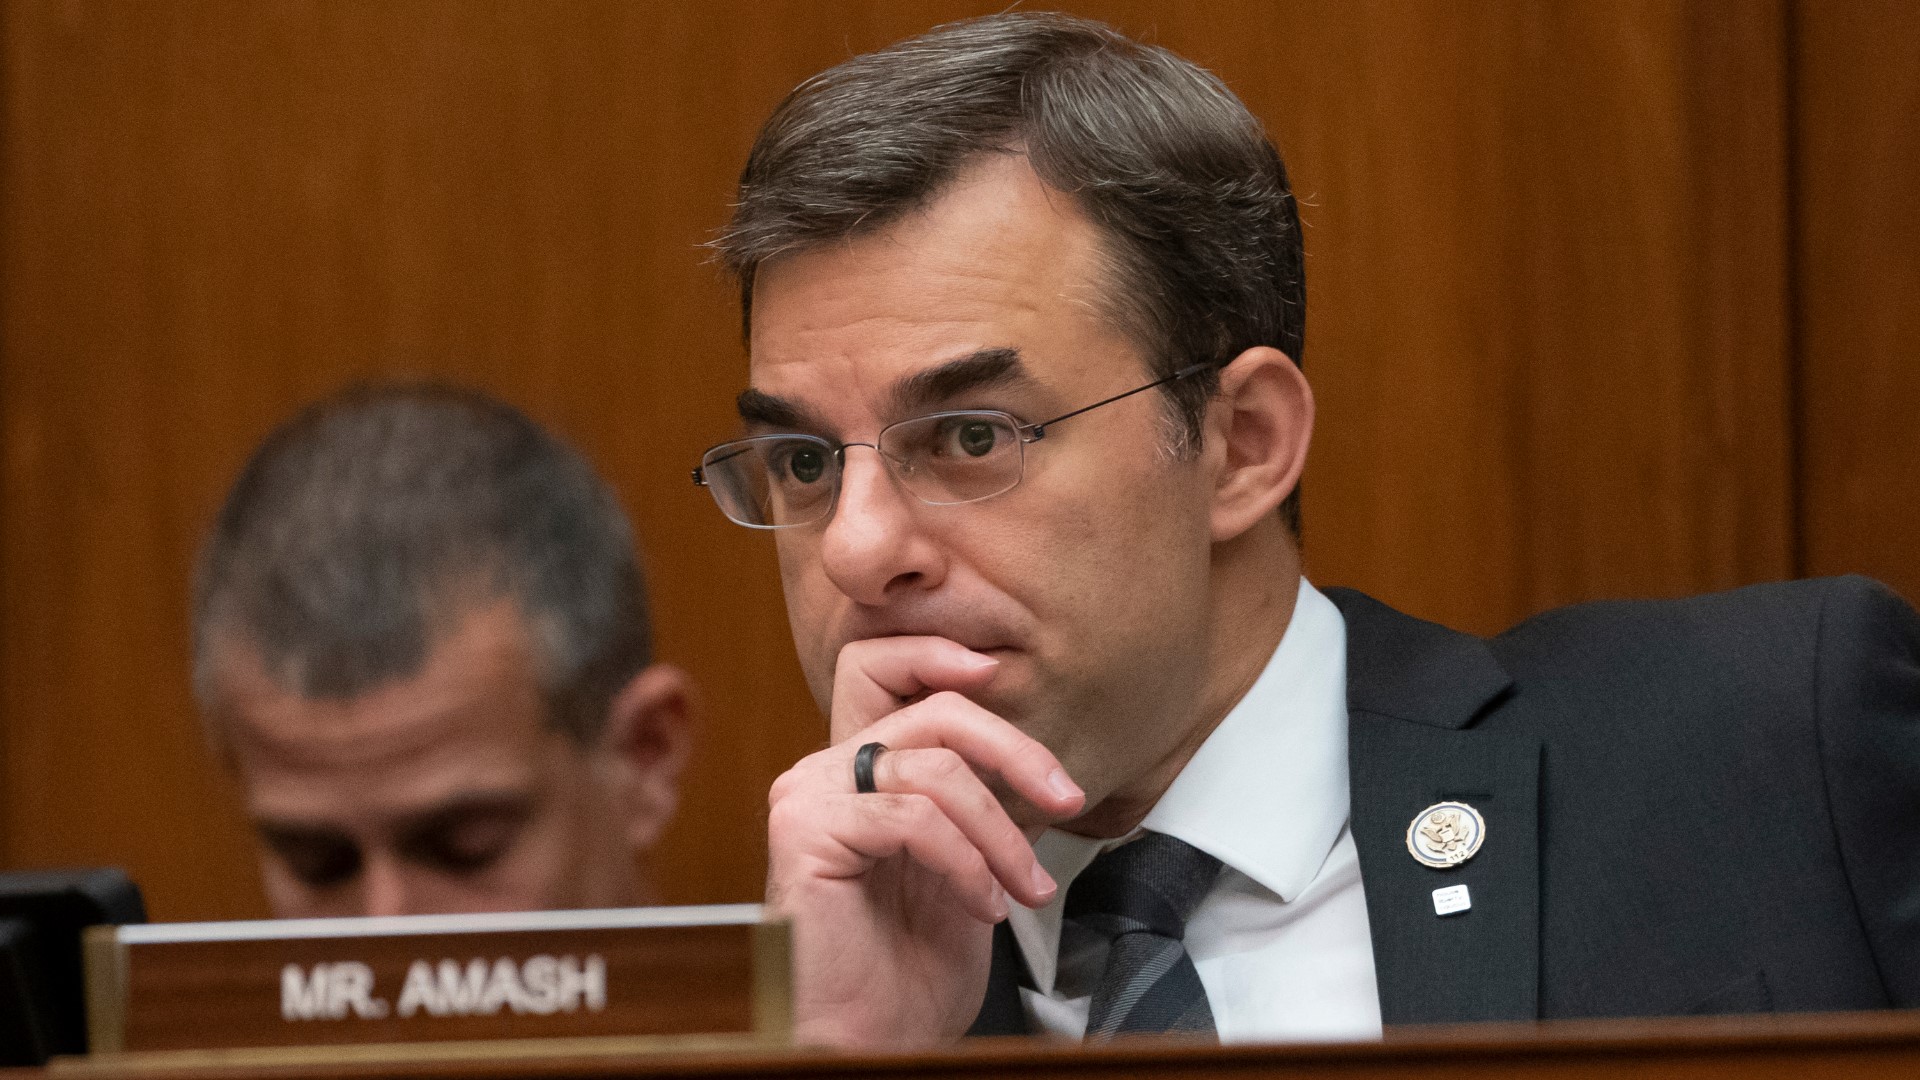 The only congressional Republican who publicly argued that President Donald Trump has engaged in impeachable conduct has announced he is quitting the GOP. Rep. Justin Amash made the announcement in an op-ed in the Washington Post Thursday morning.